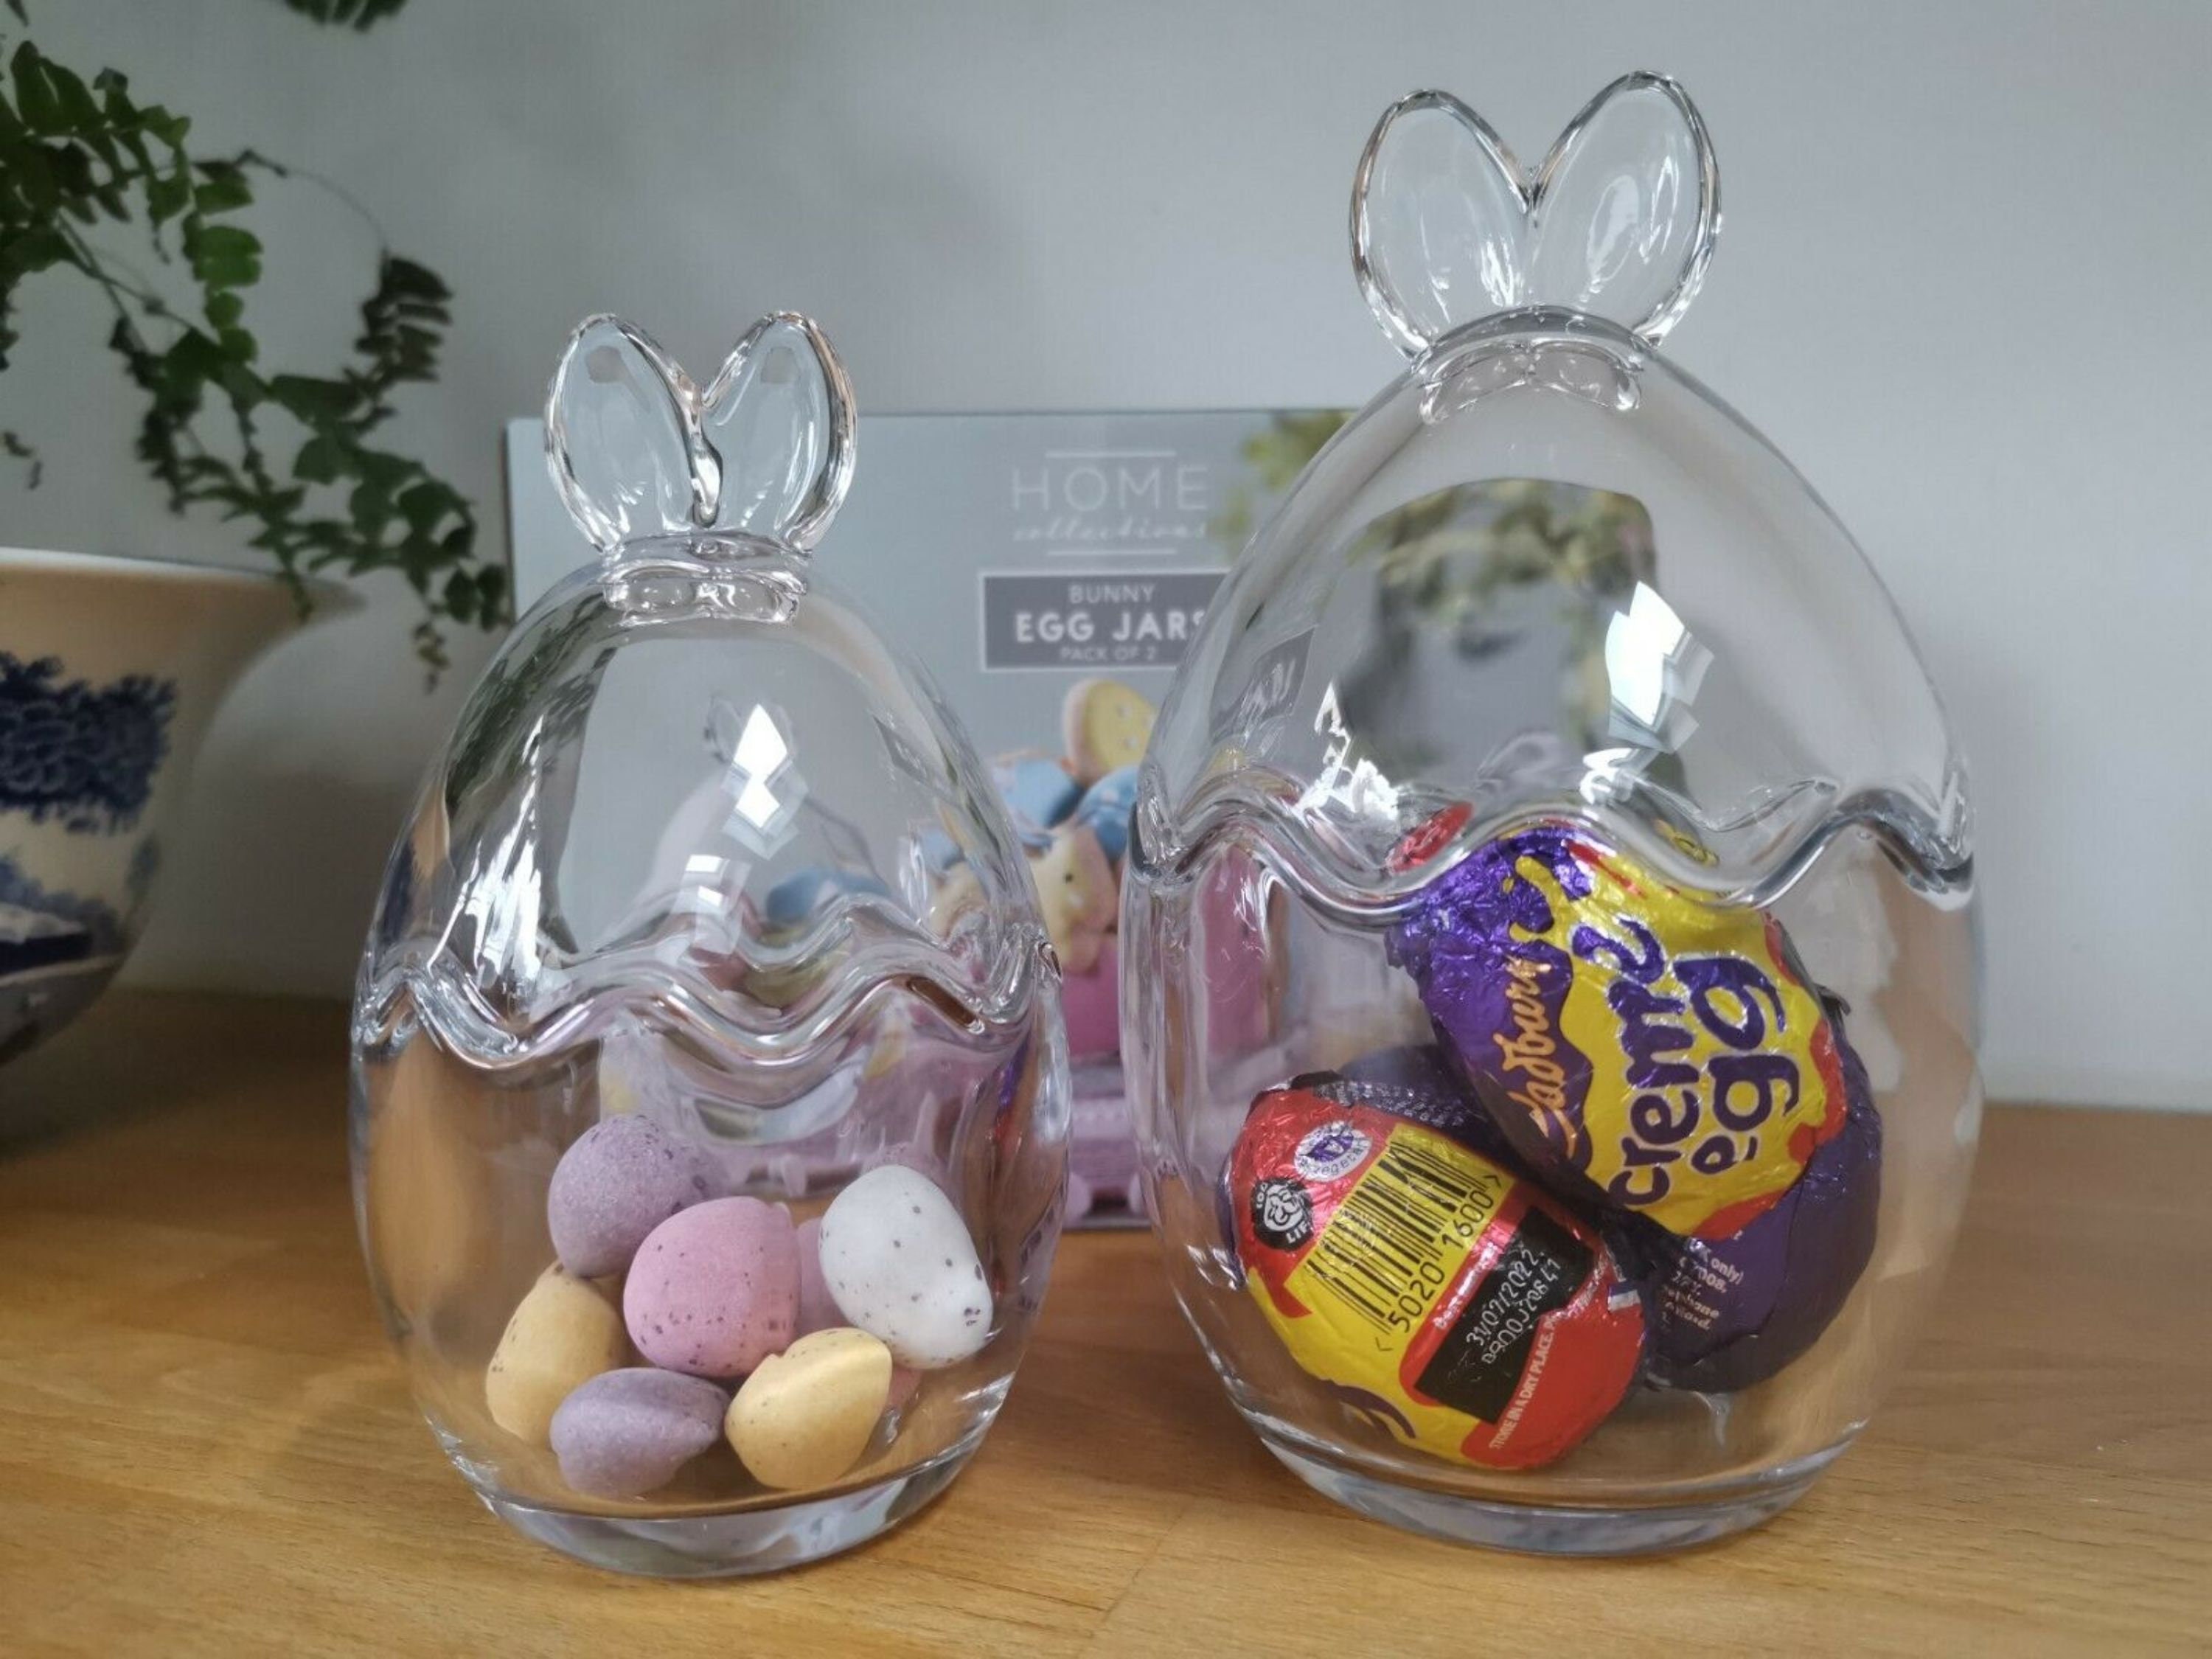 POT VERRE GIVRE - LAPIN CHOCO - PAQUES - TAILLE 1